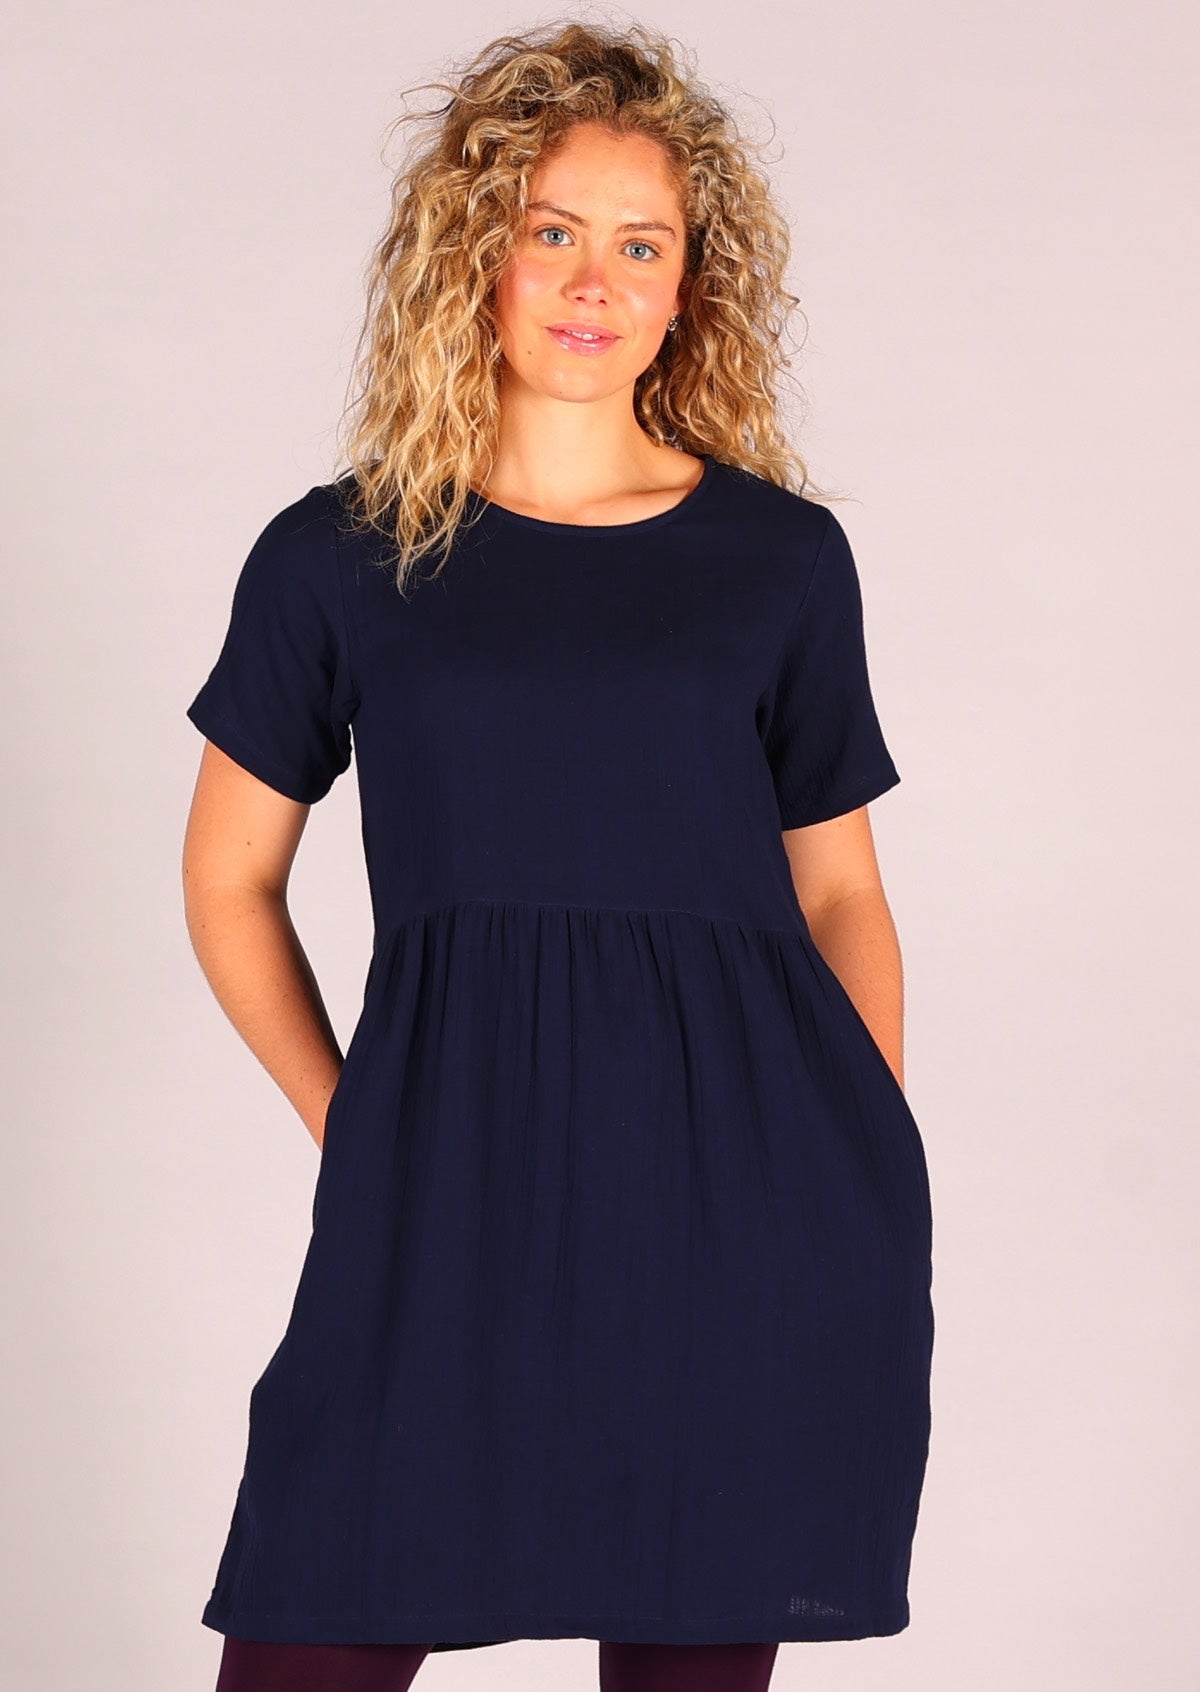 Short sleeve double cotton above knee dress with hidden side pockets